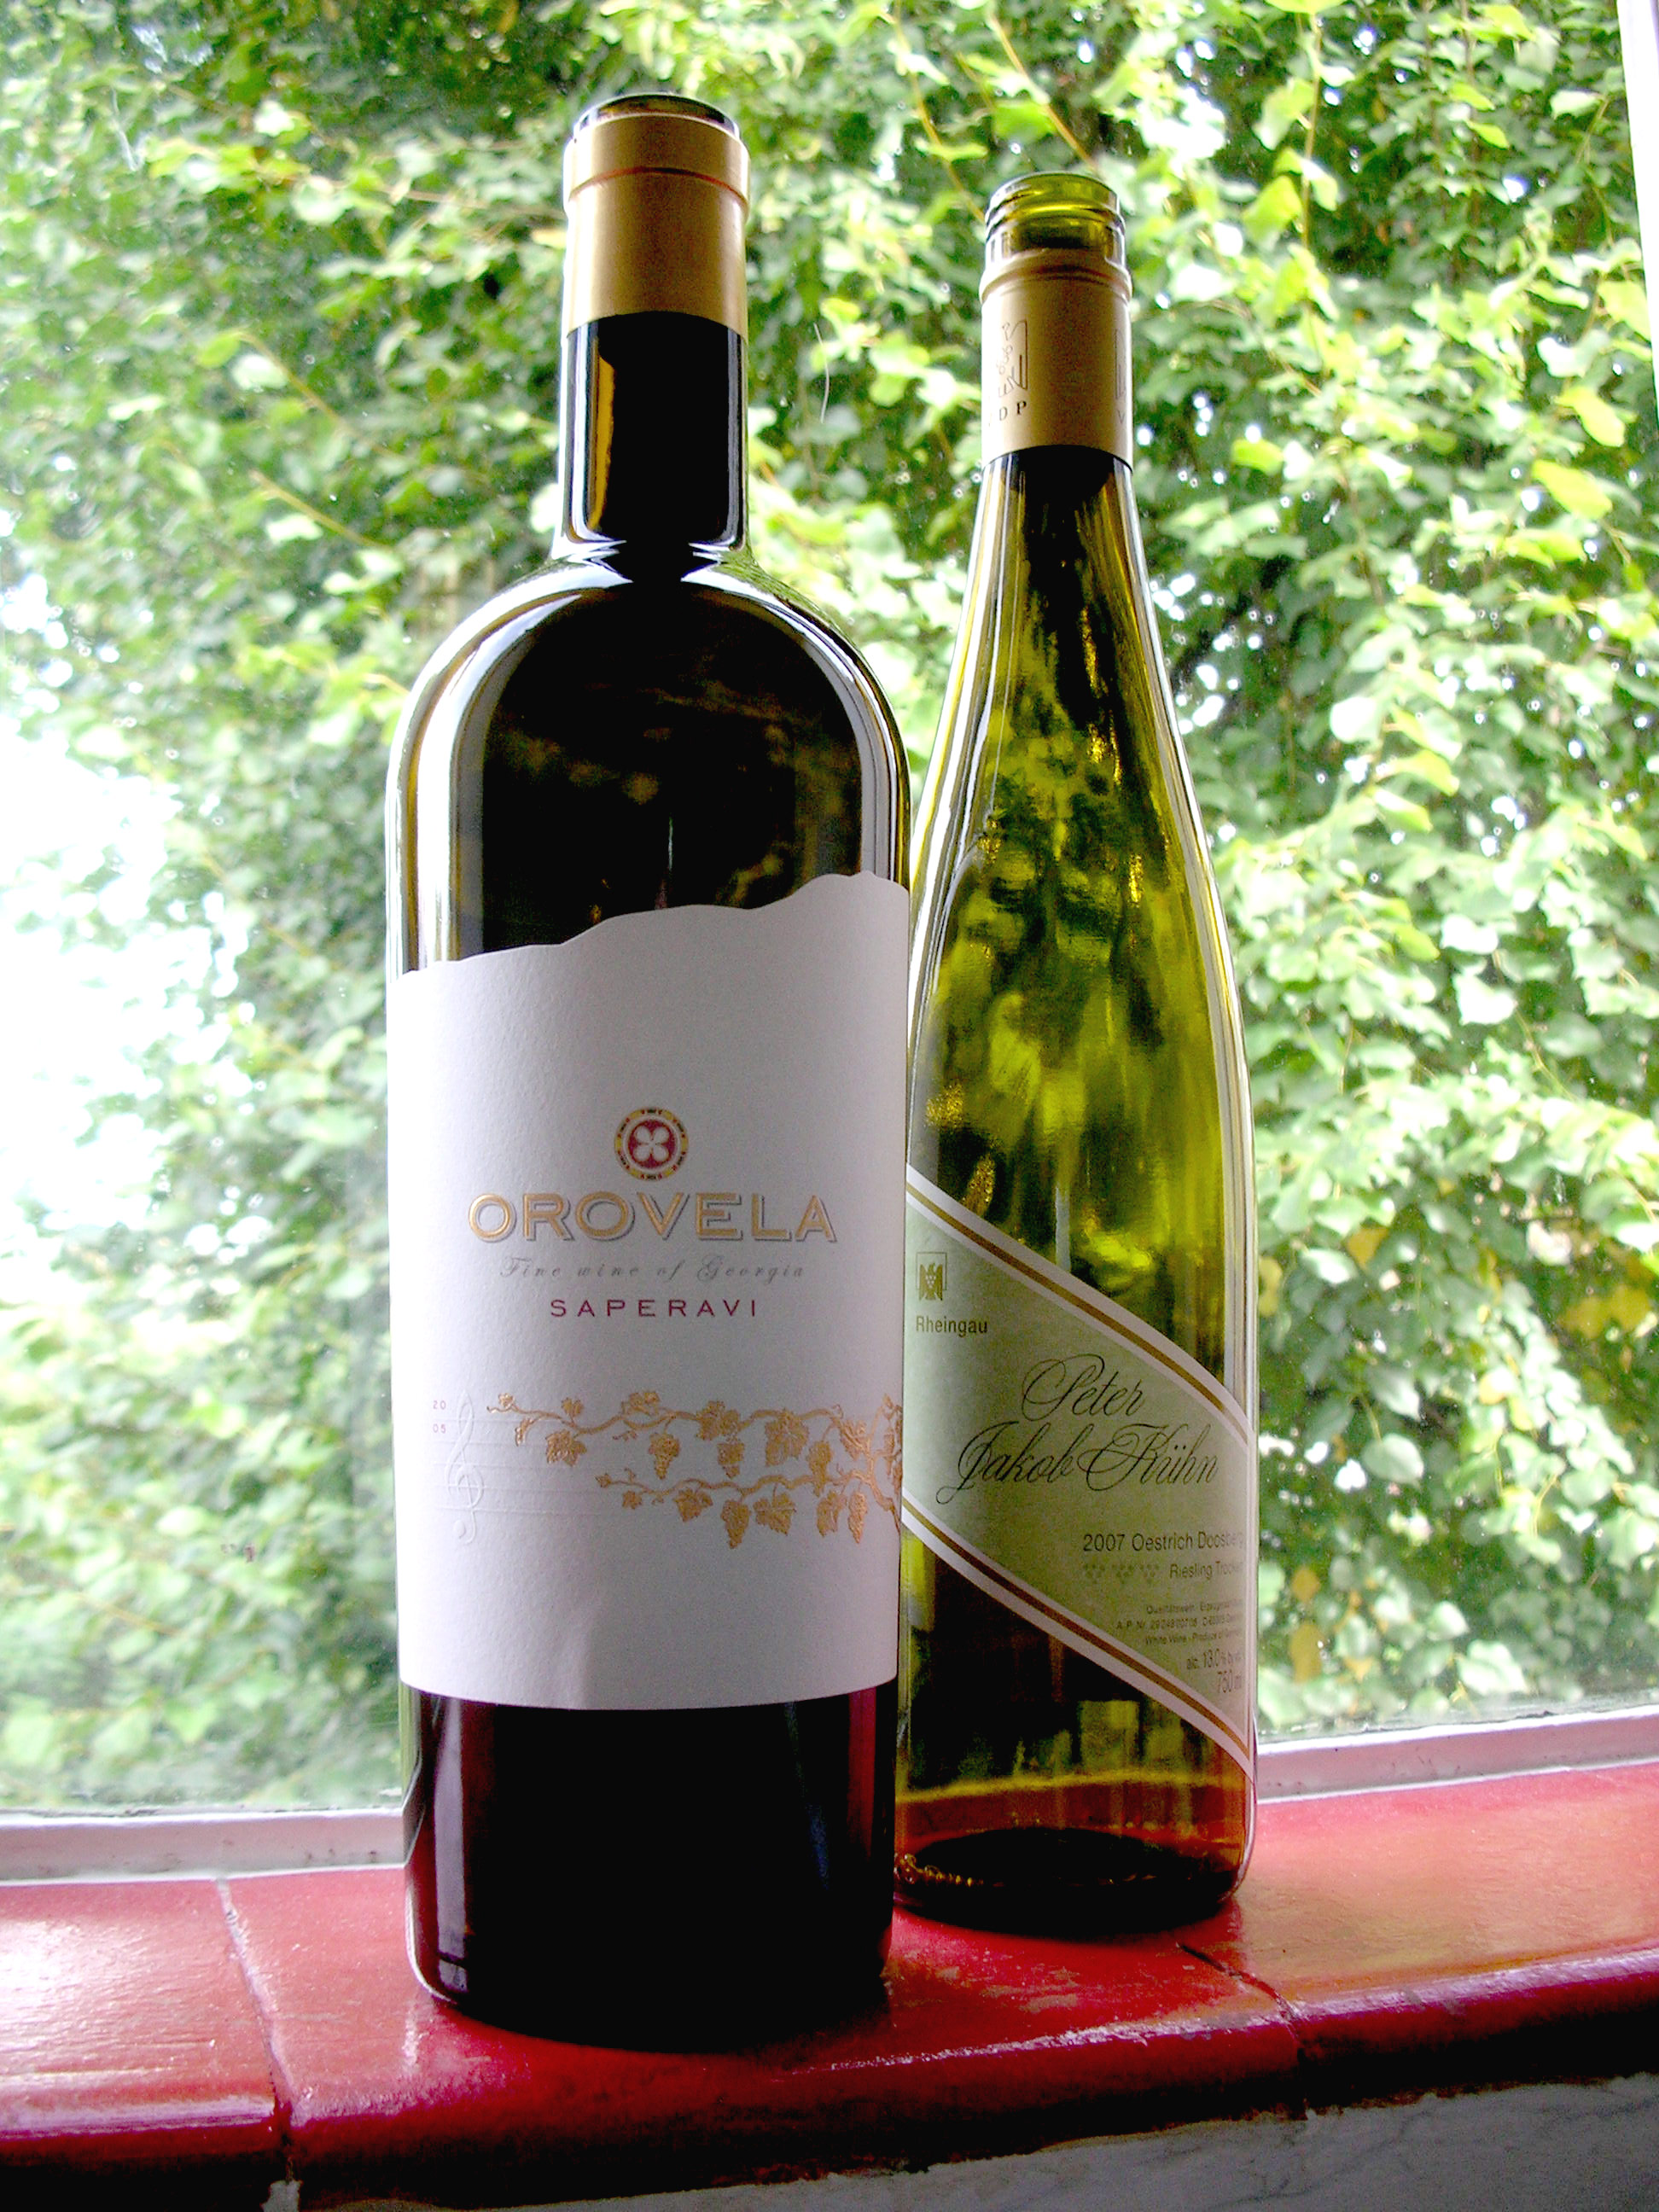 compare Kühn's Riesling bottle to the Saperavi